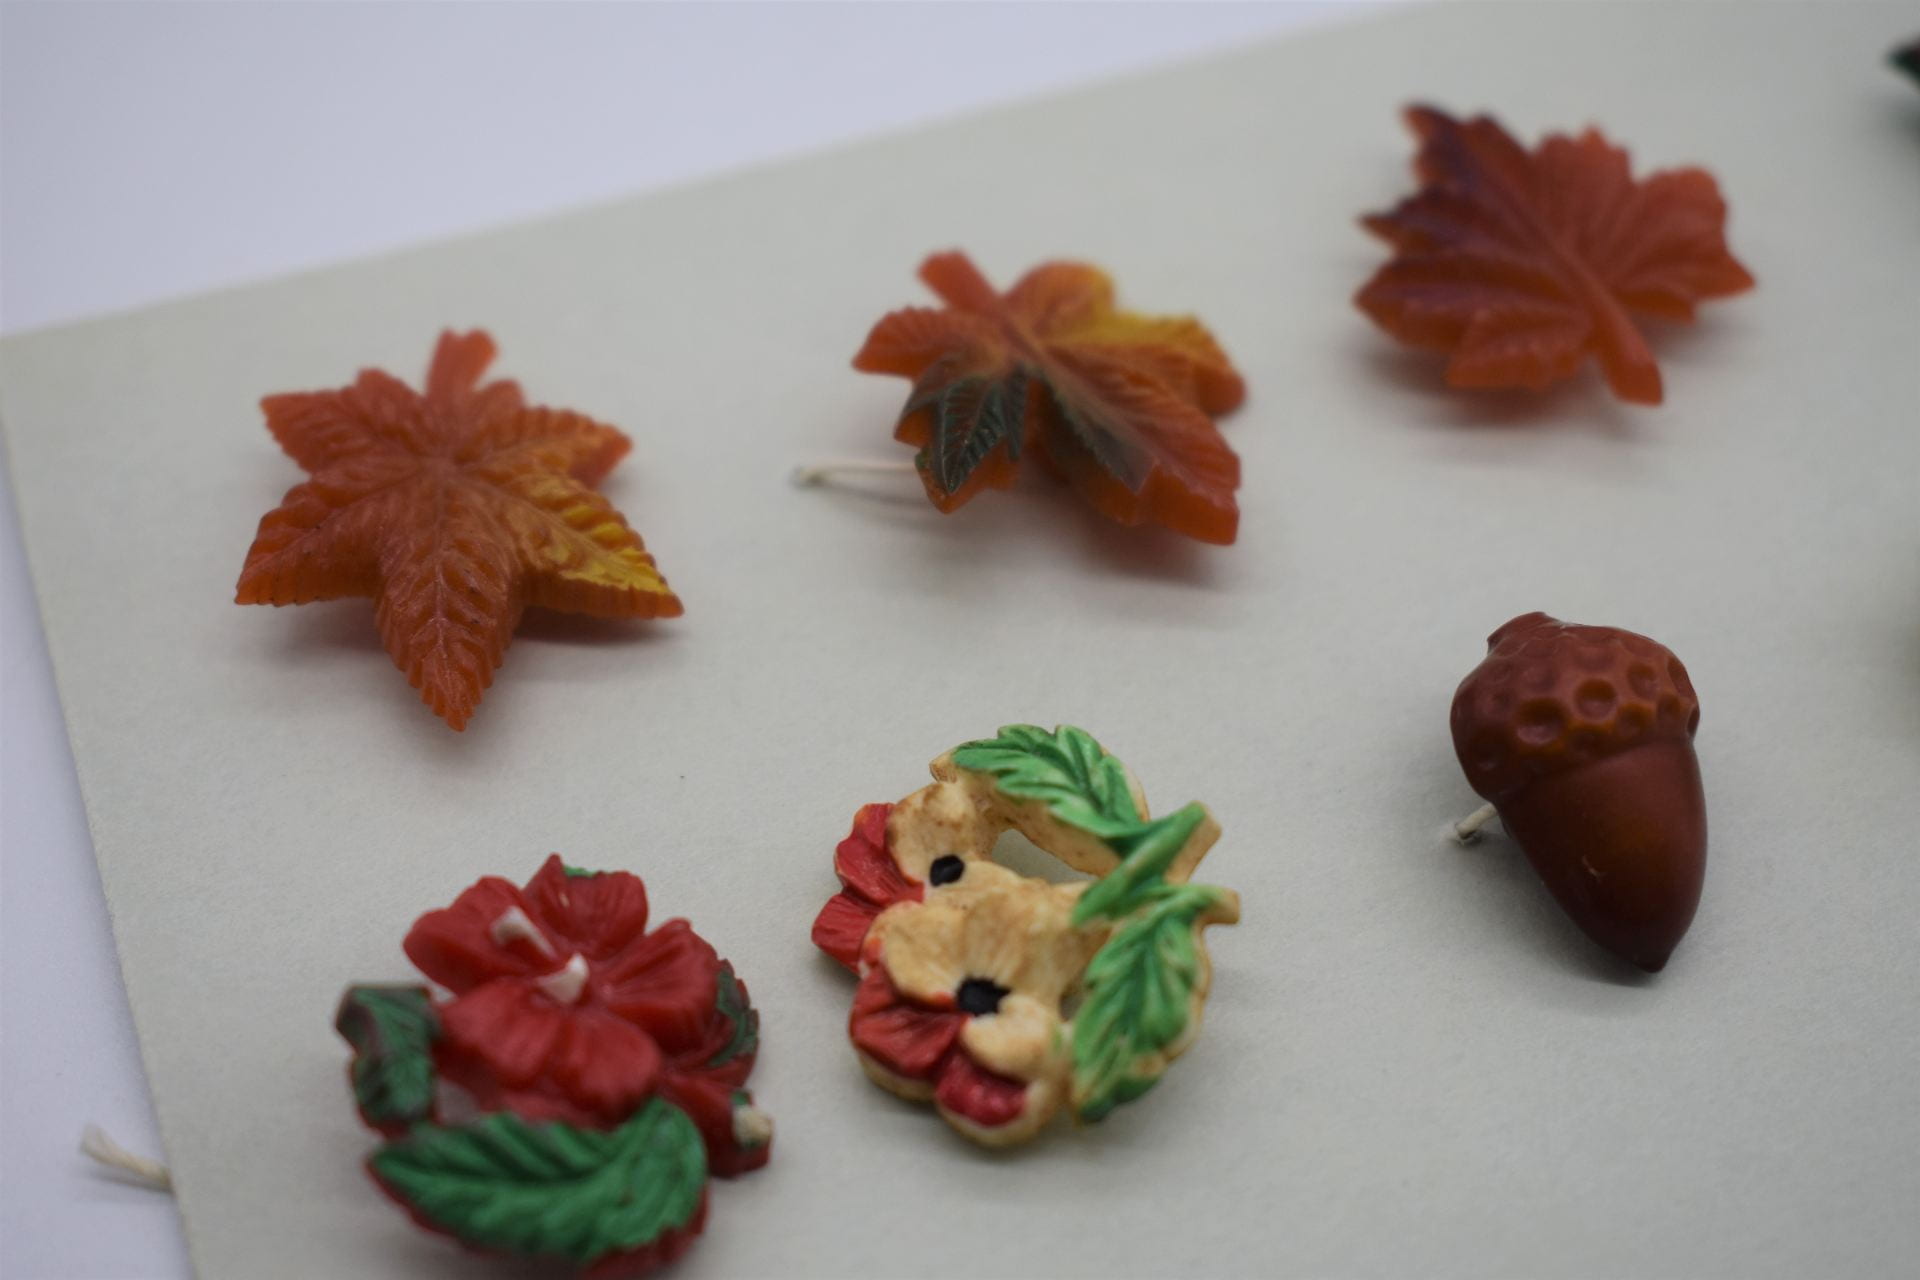 A row of different shaped buttons sewn onto a piece of paper. The buttons include little orange leaves, bouquets of flowers, and an acorn.